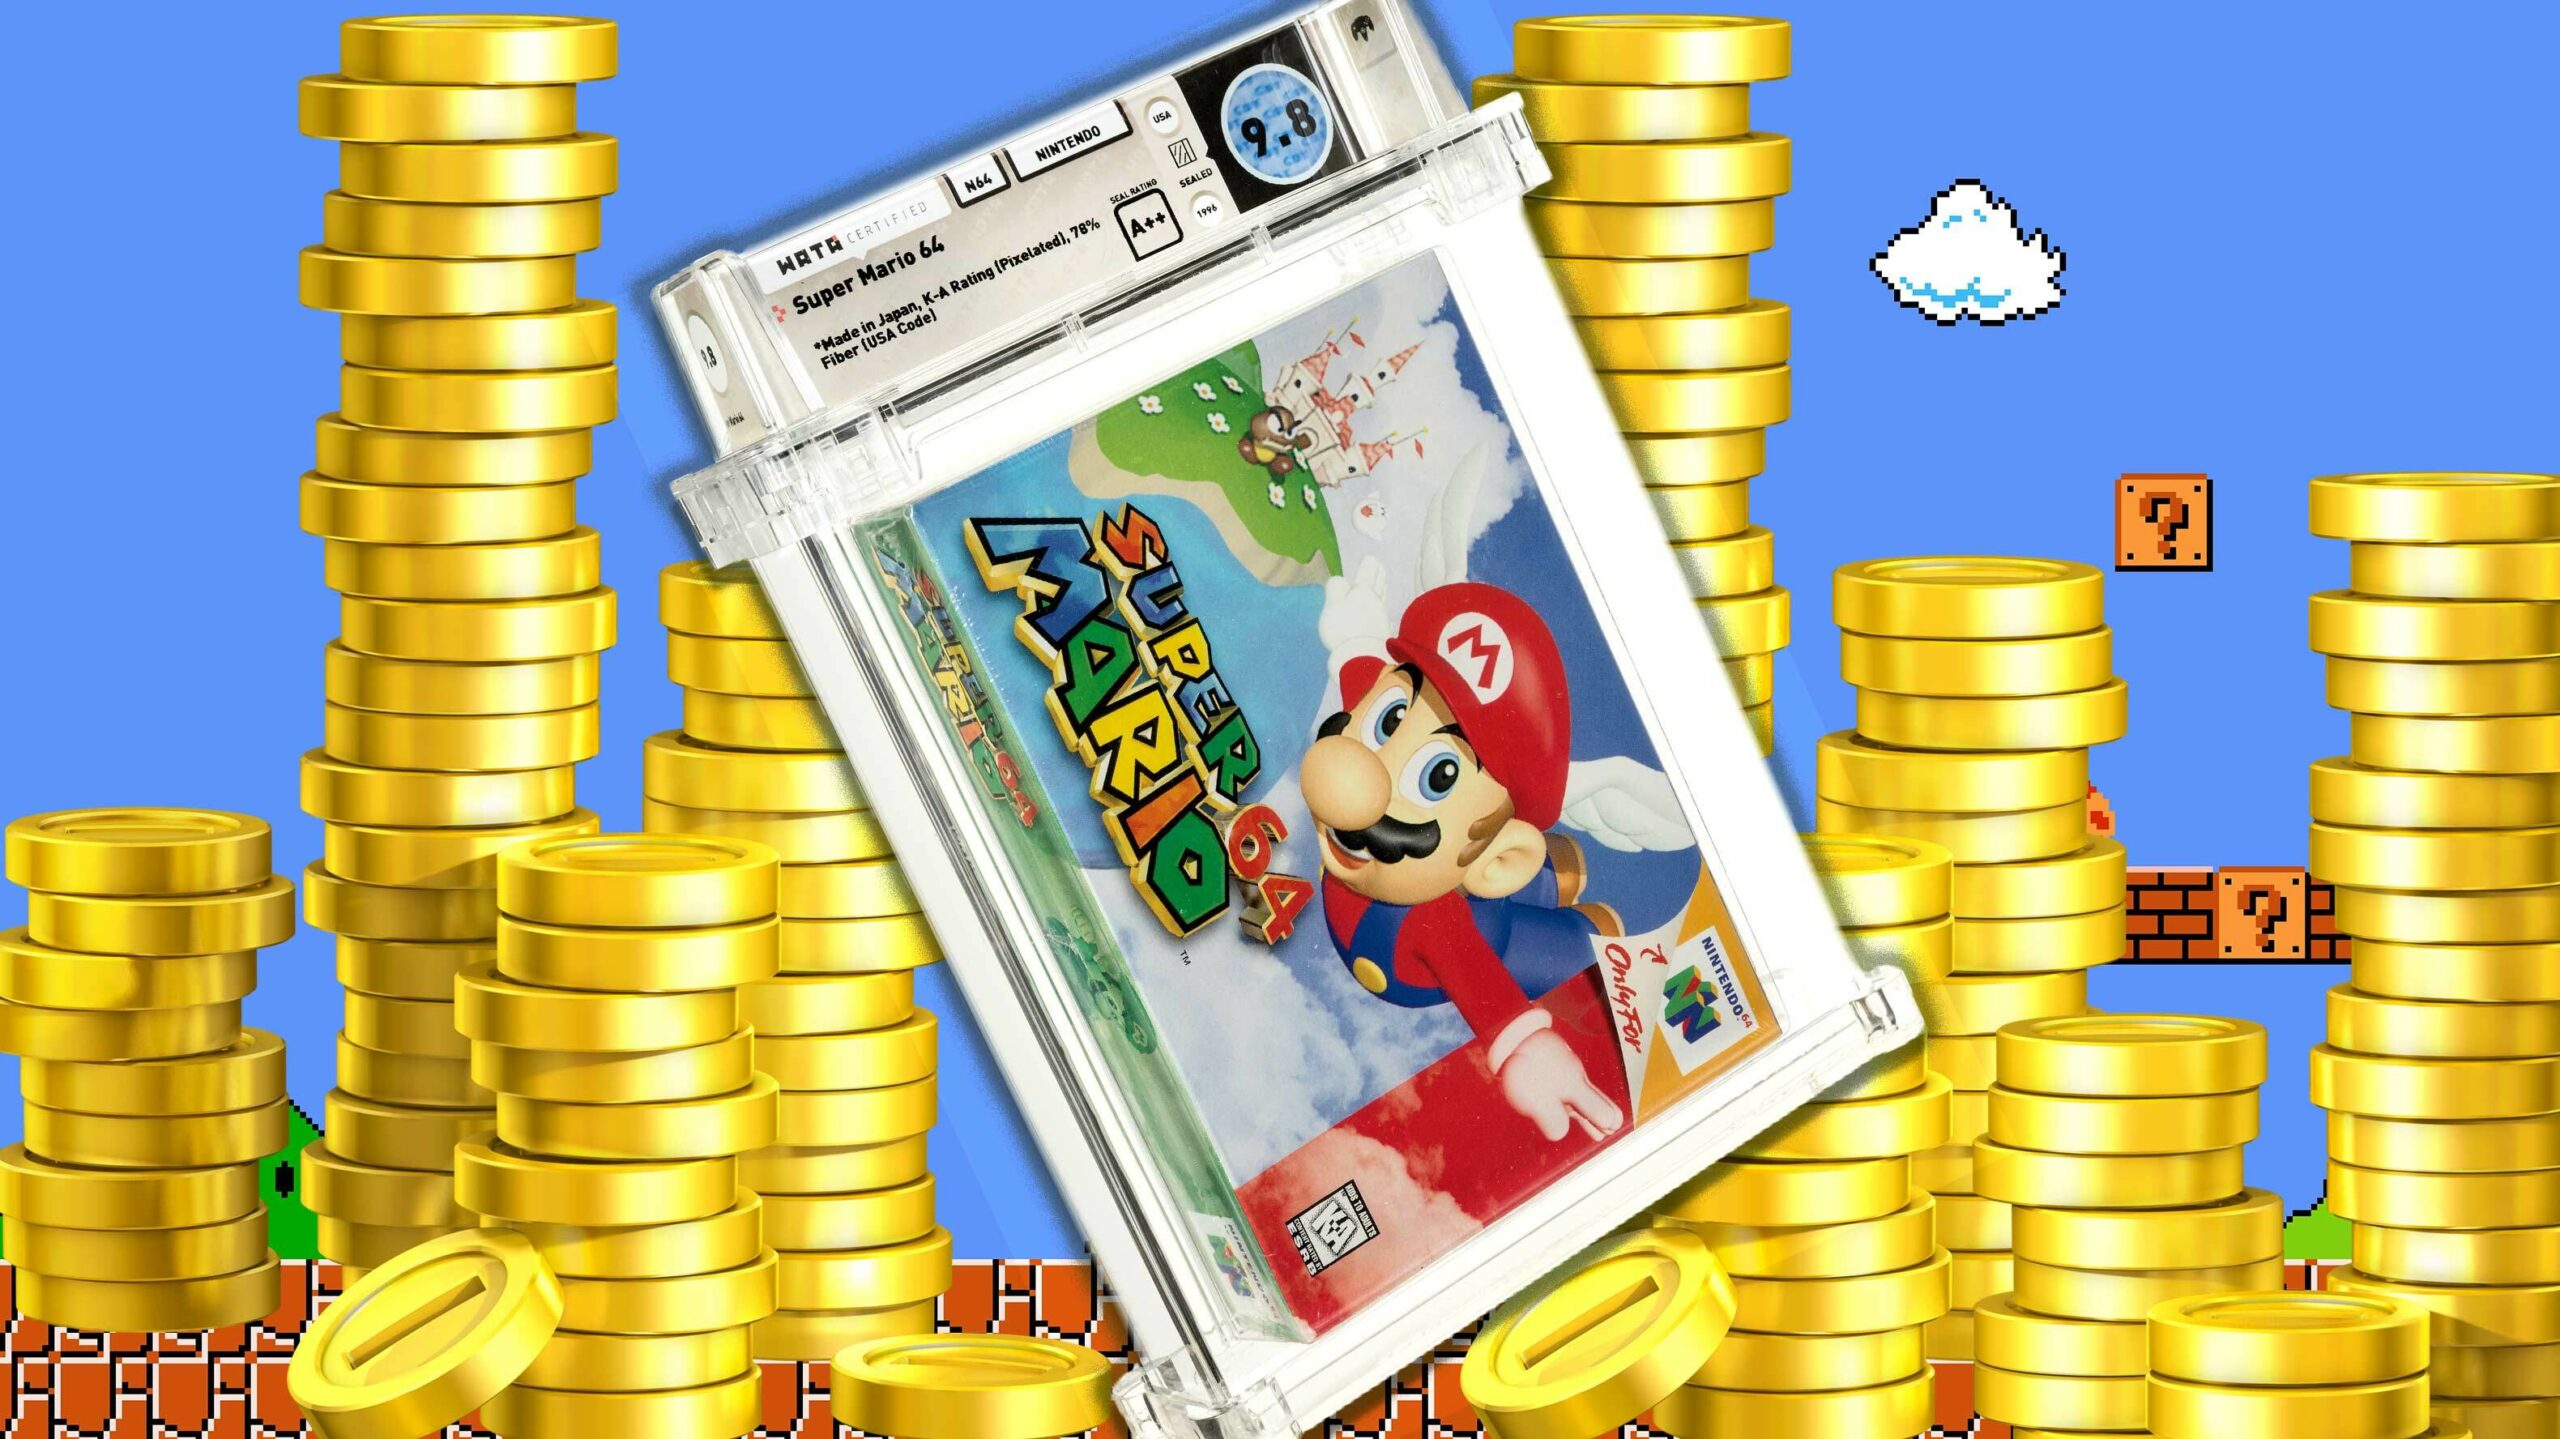 sealed-copy-of-super-mario-64-sells-for-1-56-million